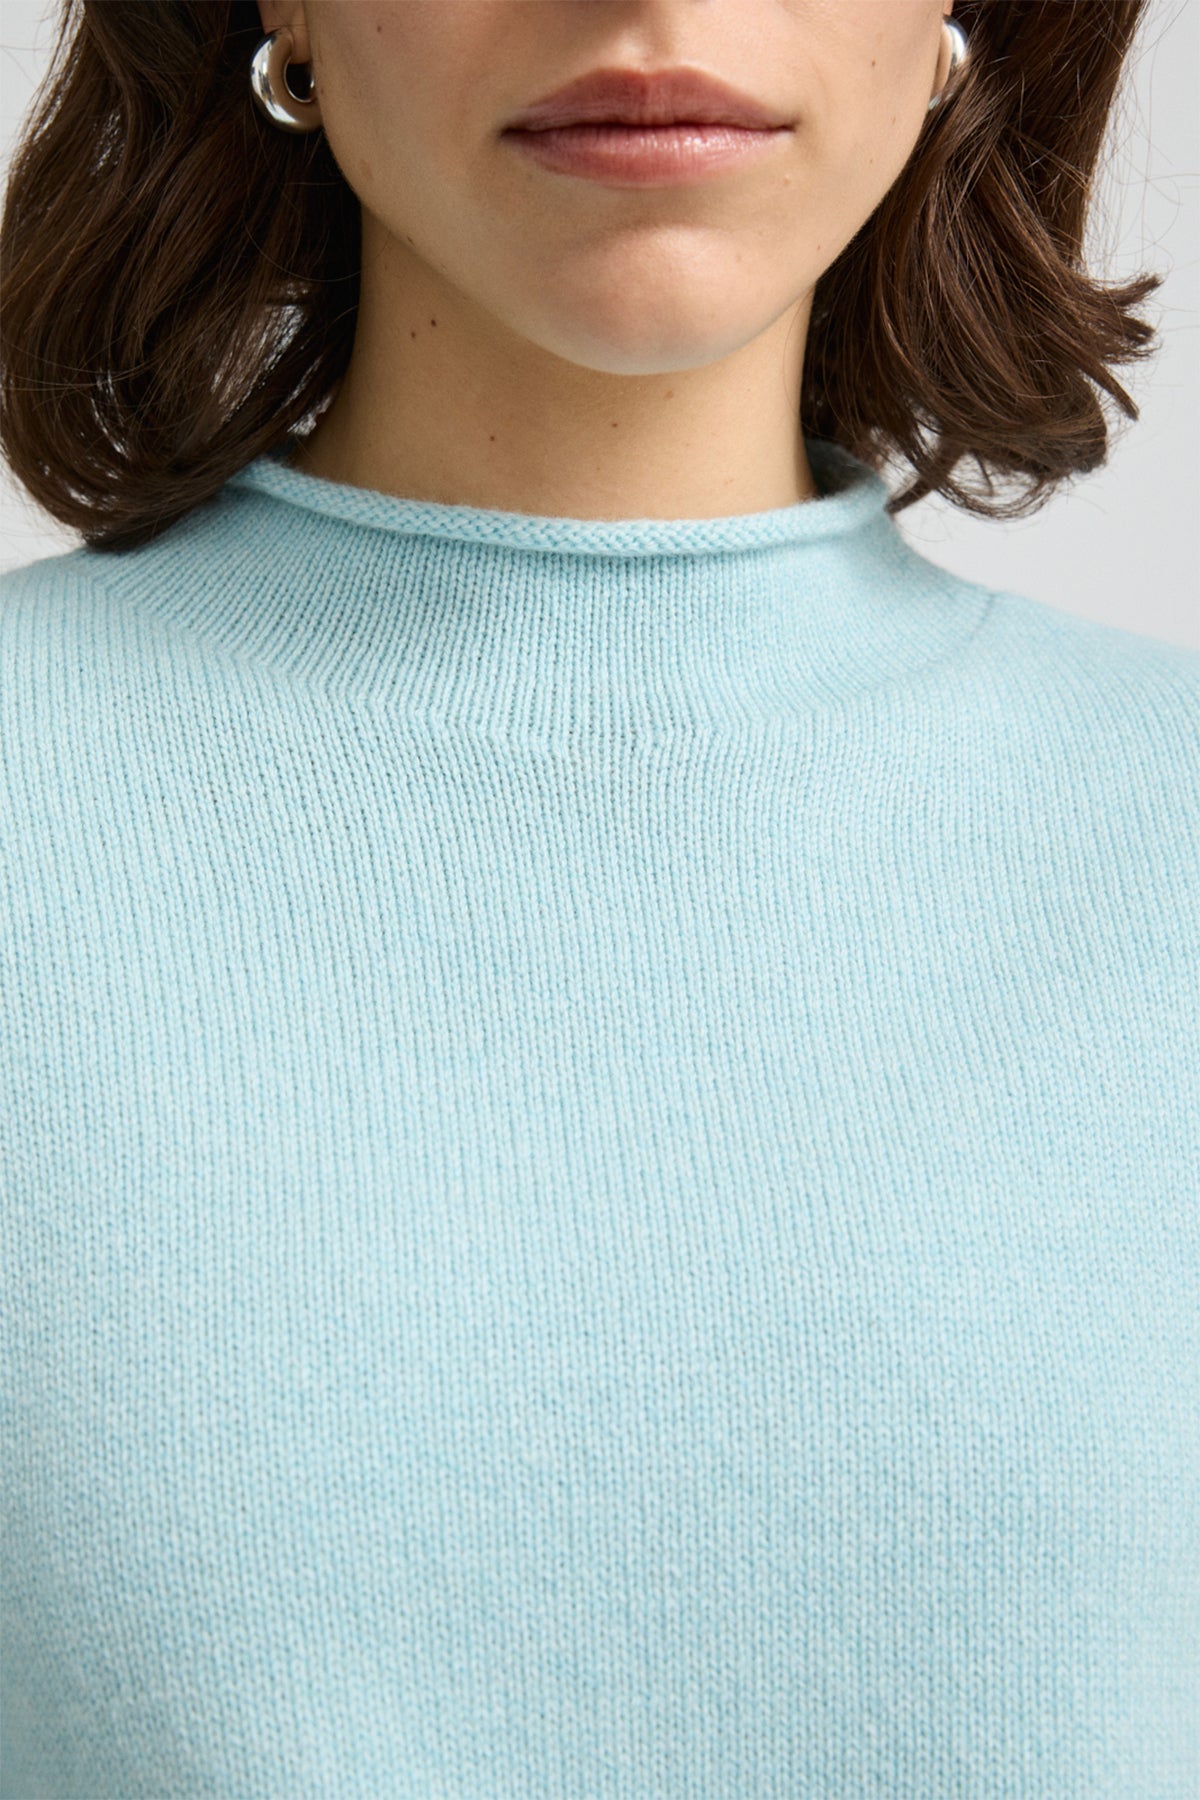 Relaxed Fit Mock Neck Glacial Blue